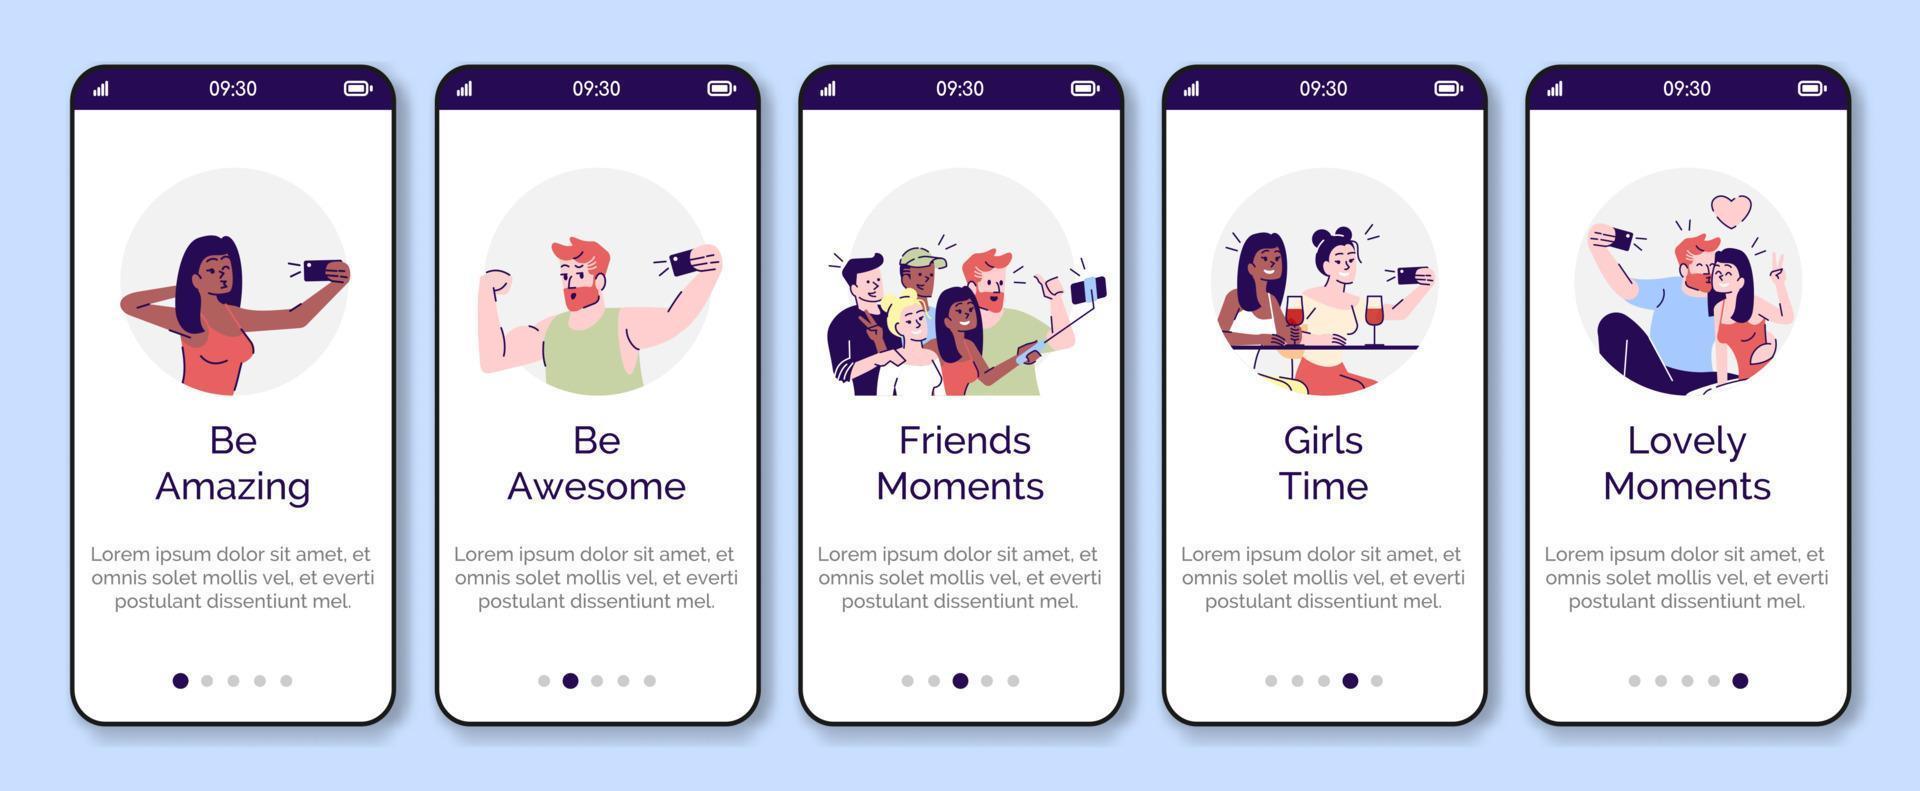 Selfie onboarding mobile app screen vector template. Taking bright self photo on smartphone. Walkthrough website steps with flat characters. UX, UI, GUI smartphone cartoon interface concept